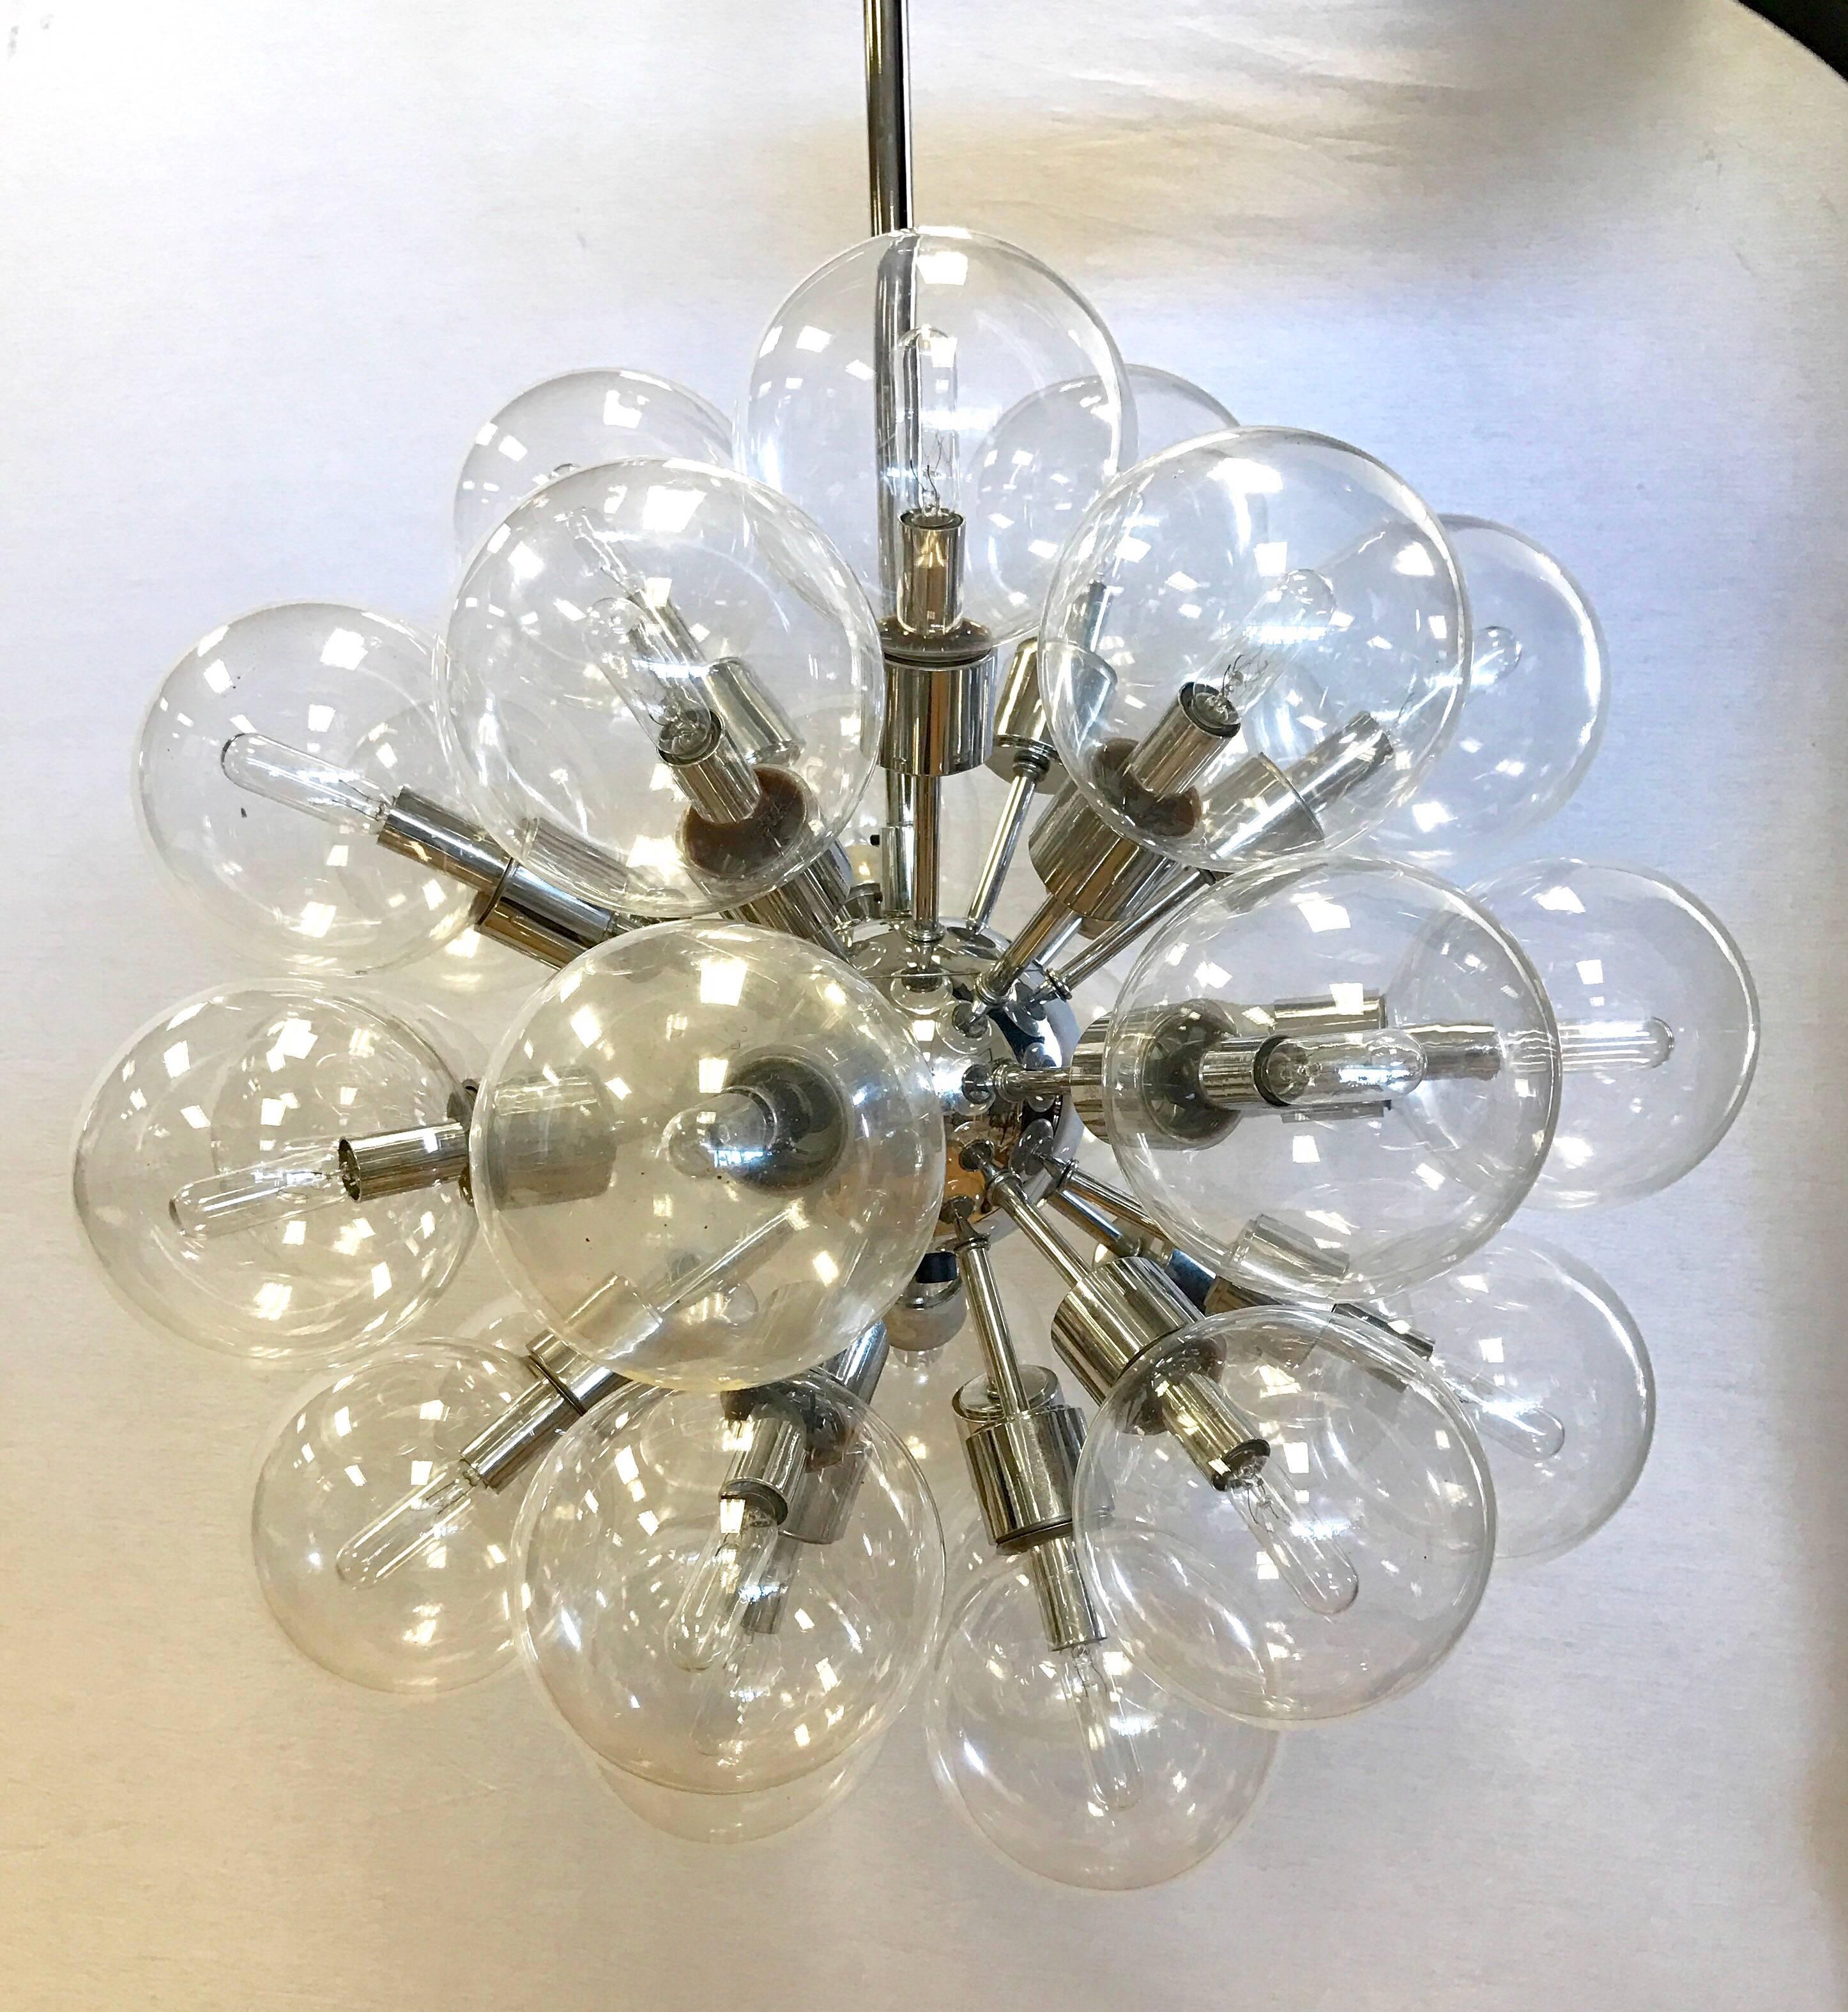 Coveted Mid-Century Modern Lightolier 30 light Sputnik chandelier, circa 1960s. Features 30 original glass globes on polished chrome spokes radiating from a central chrome nucleus. It is made of polished chrome and has some weight to it unlike the